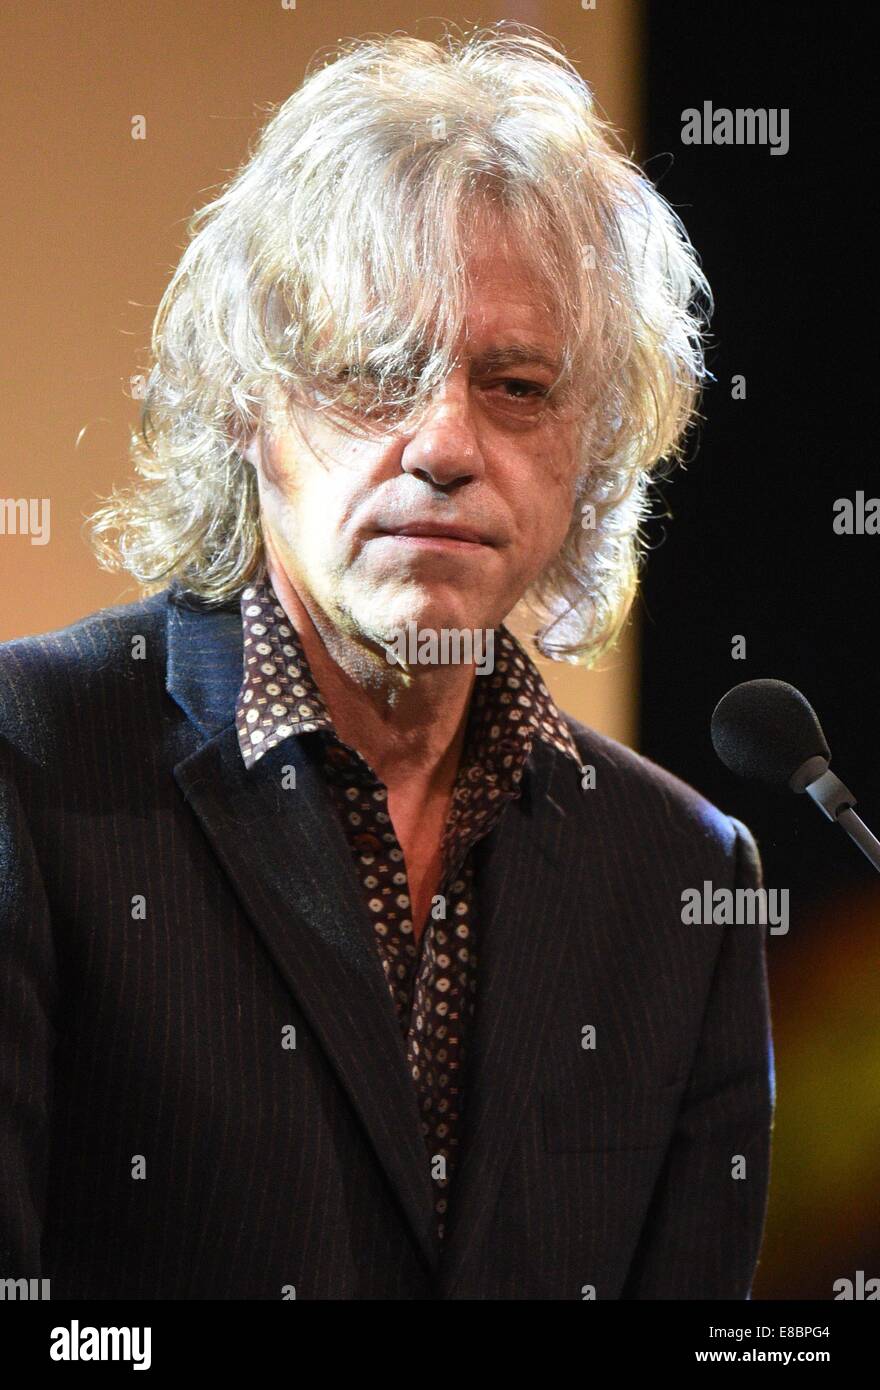 Hattingen, Germany. 03rd Oct, 2014. Musician Bob Geldof gives the laudatory speech for musician Quincy Jones who won in the category 'Charity' at the 10th Steiger Awards in Hattingen, Germany, 03 October 2014. Photo: Henning Kaiser/dpa/Alamy Live News Stock Photo